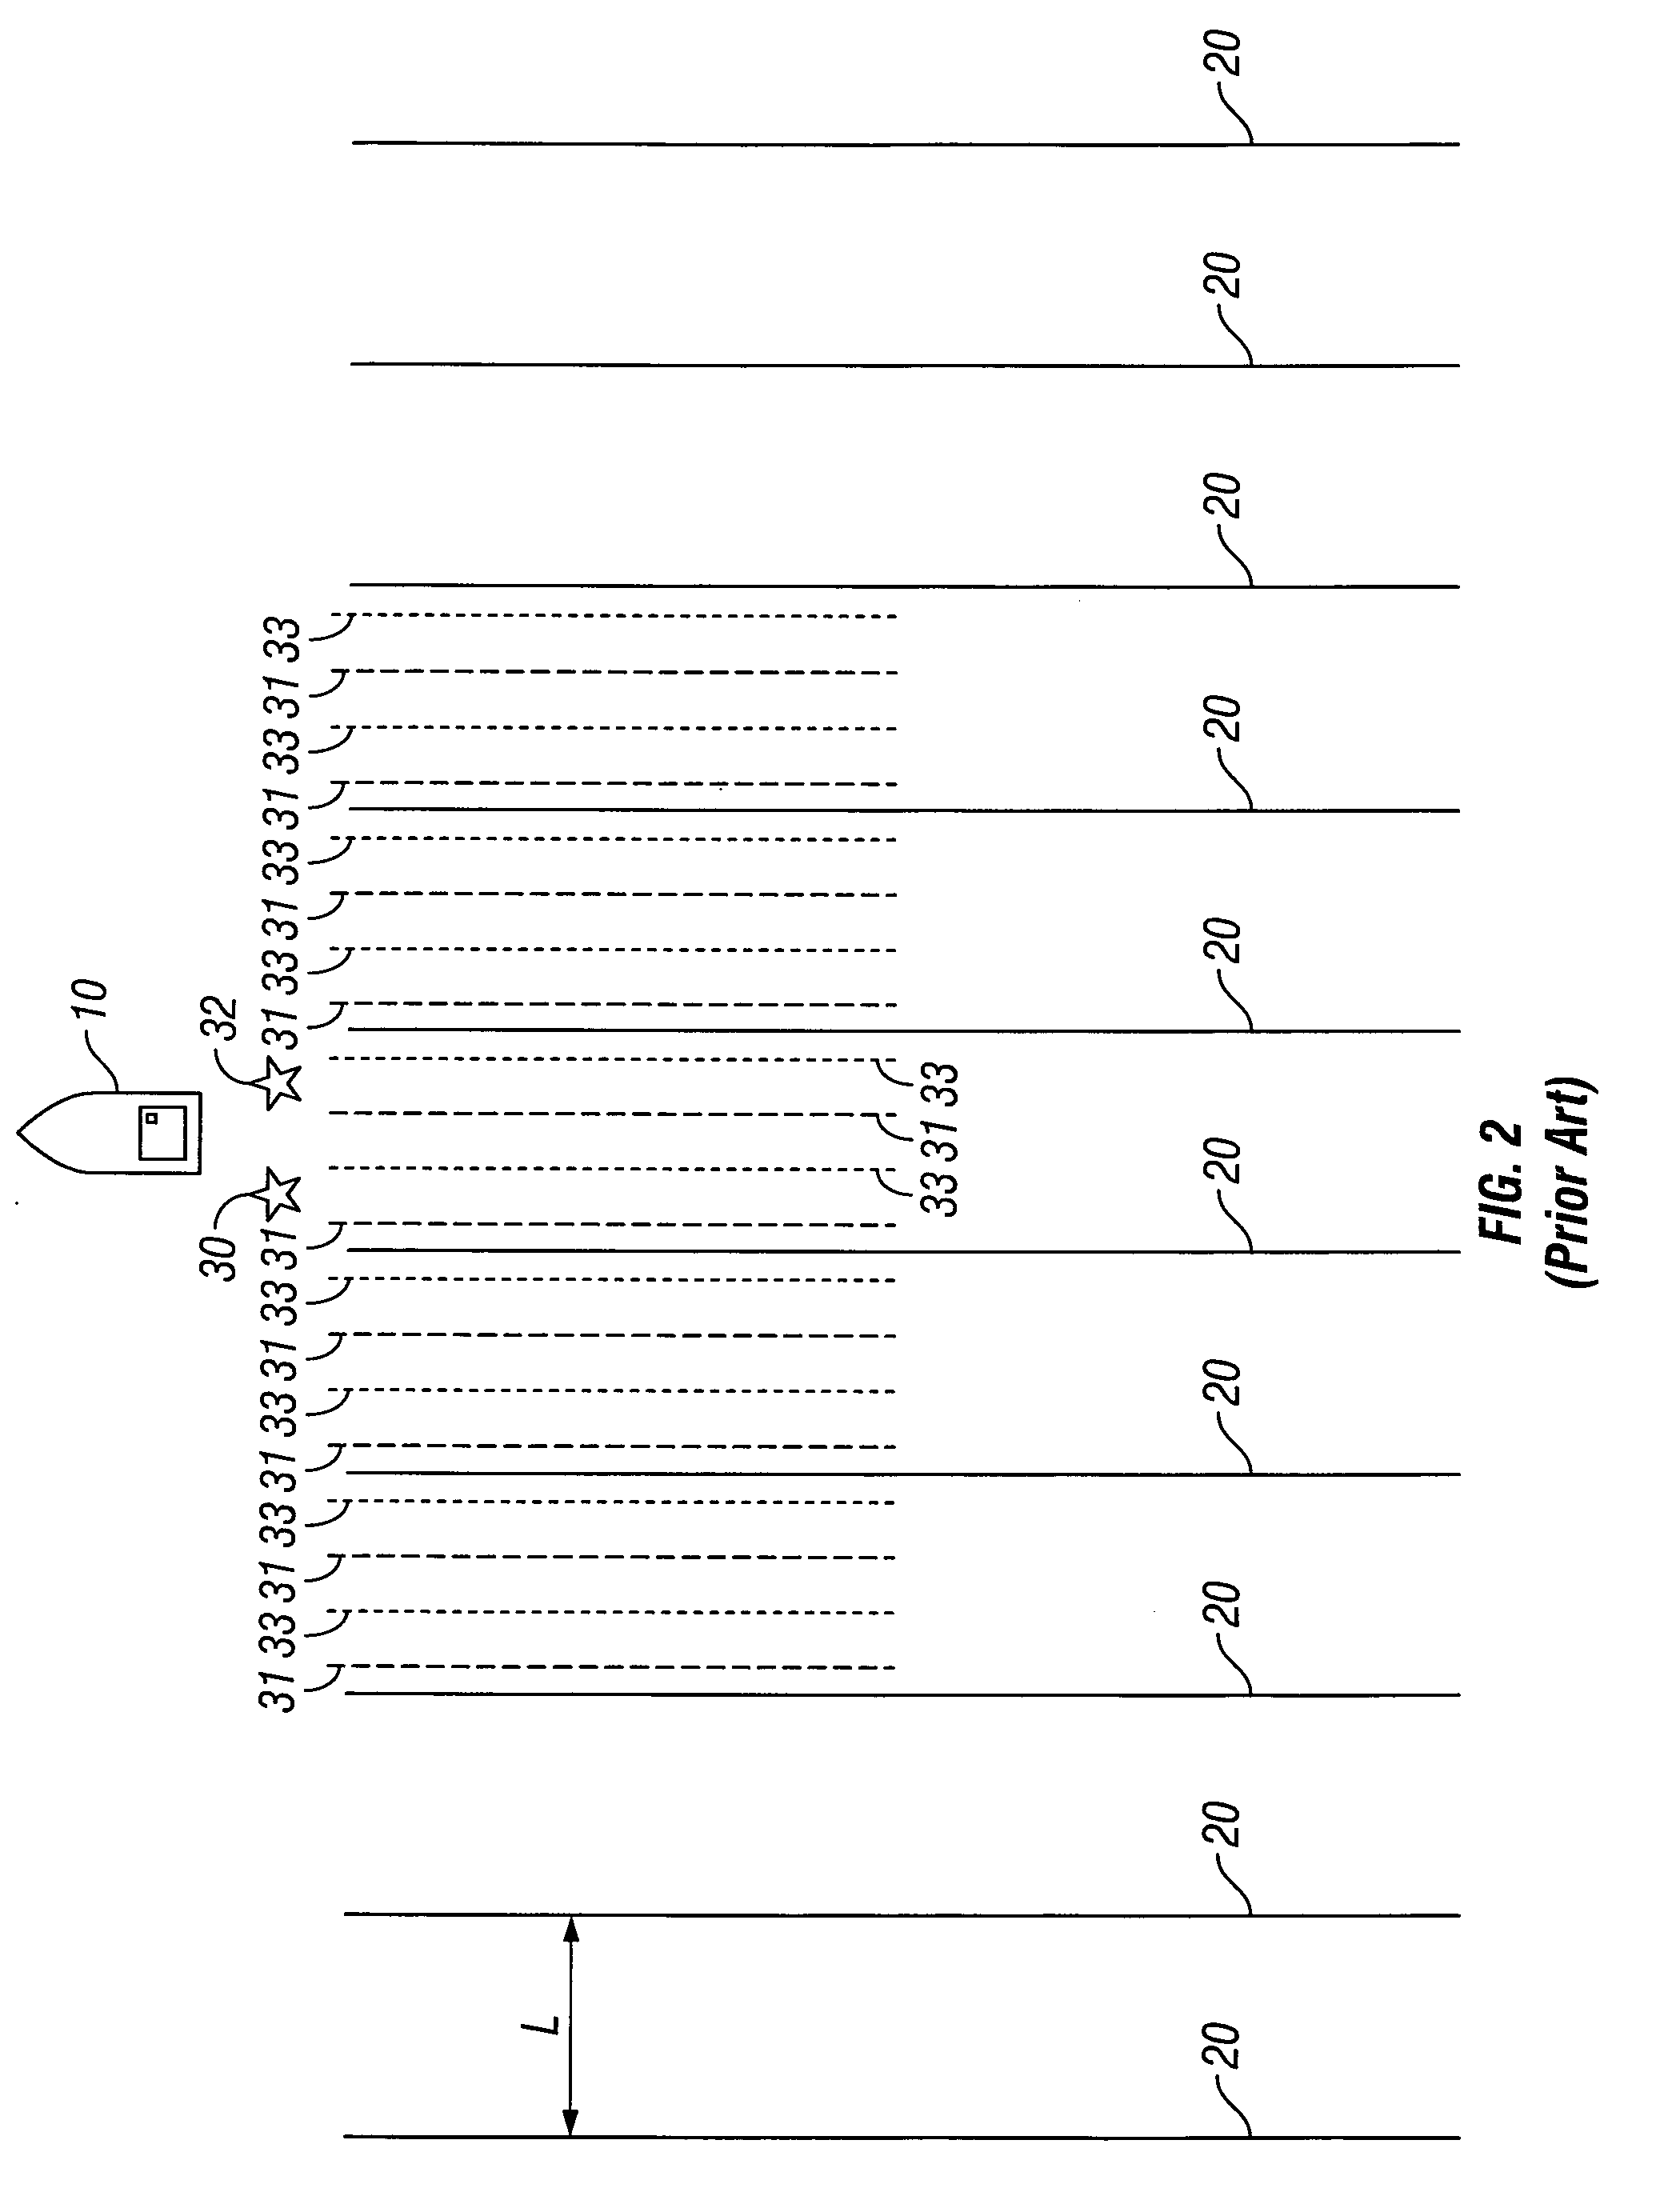 Method for seismic surveying using wider lateral spacing between sources to improve efficiency